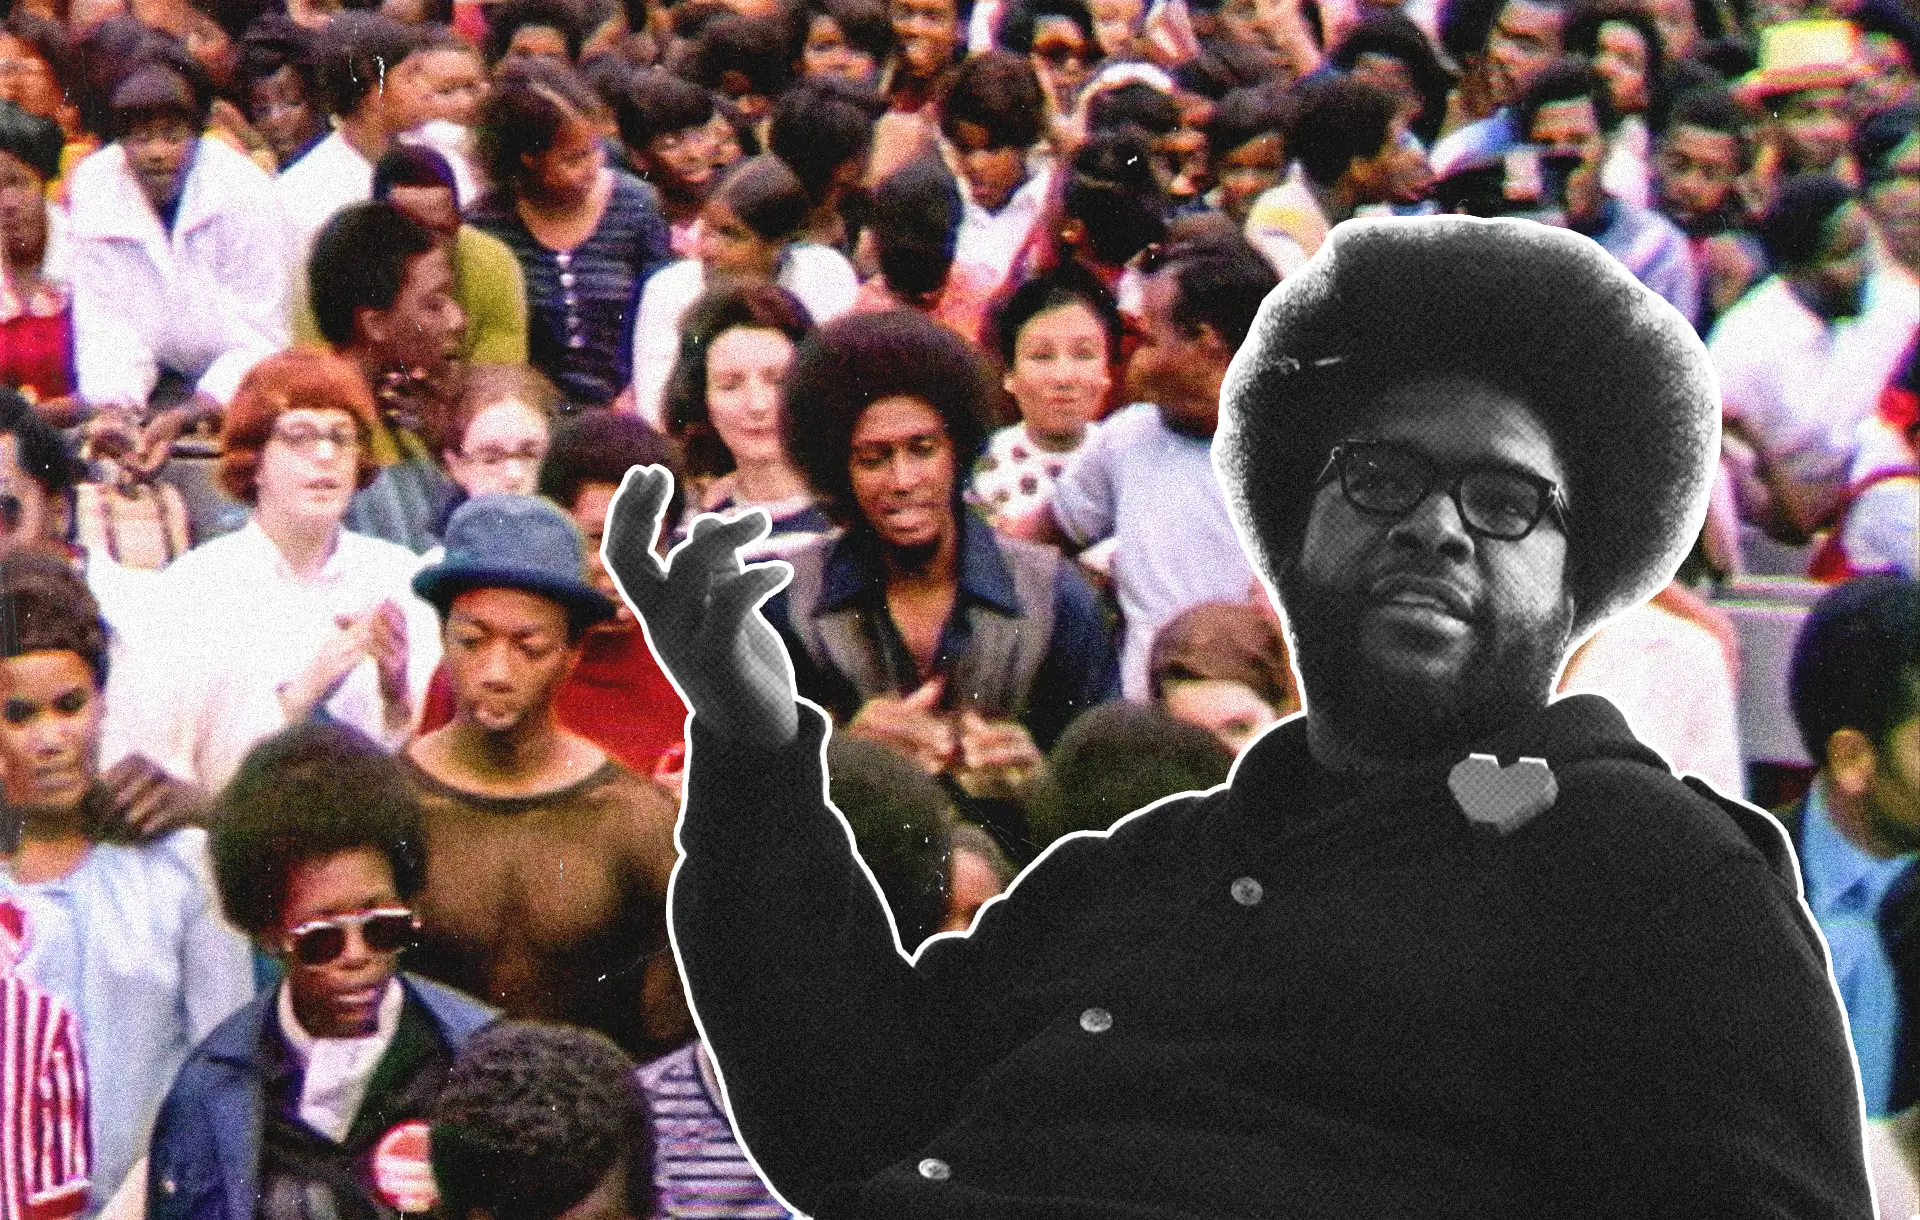 Questlove On Investigating "The Black Side Of Things" With His New Movie 'Summer Of Soul' | Features | LIVING LIFE FEARLESS